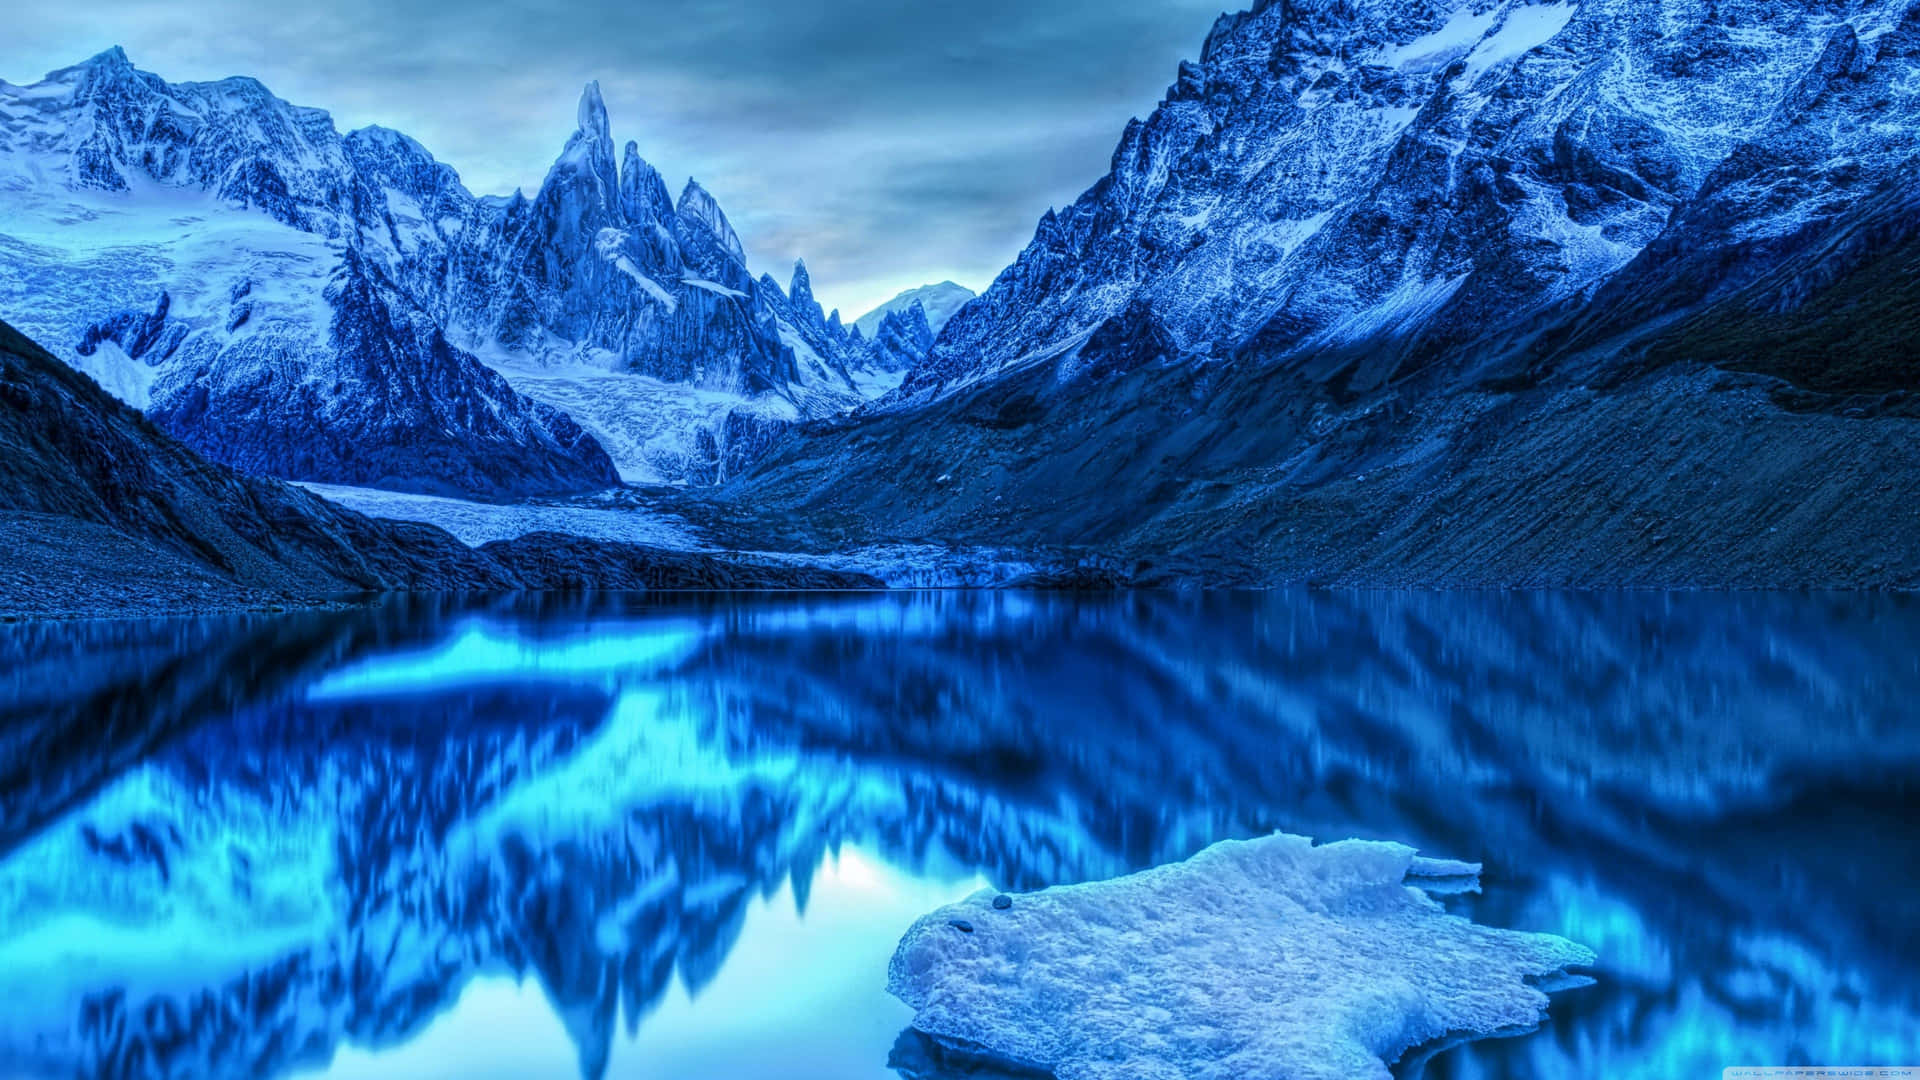 A Lake With Icebergs And Mountains In The Background Wallpaper